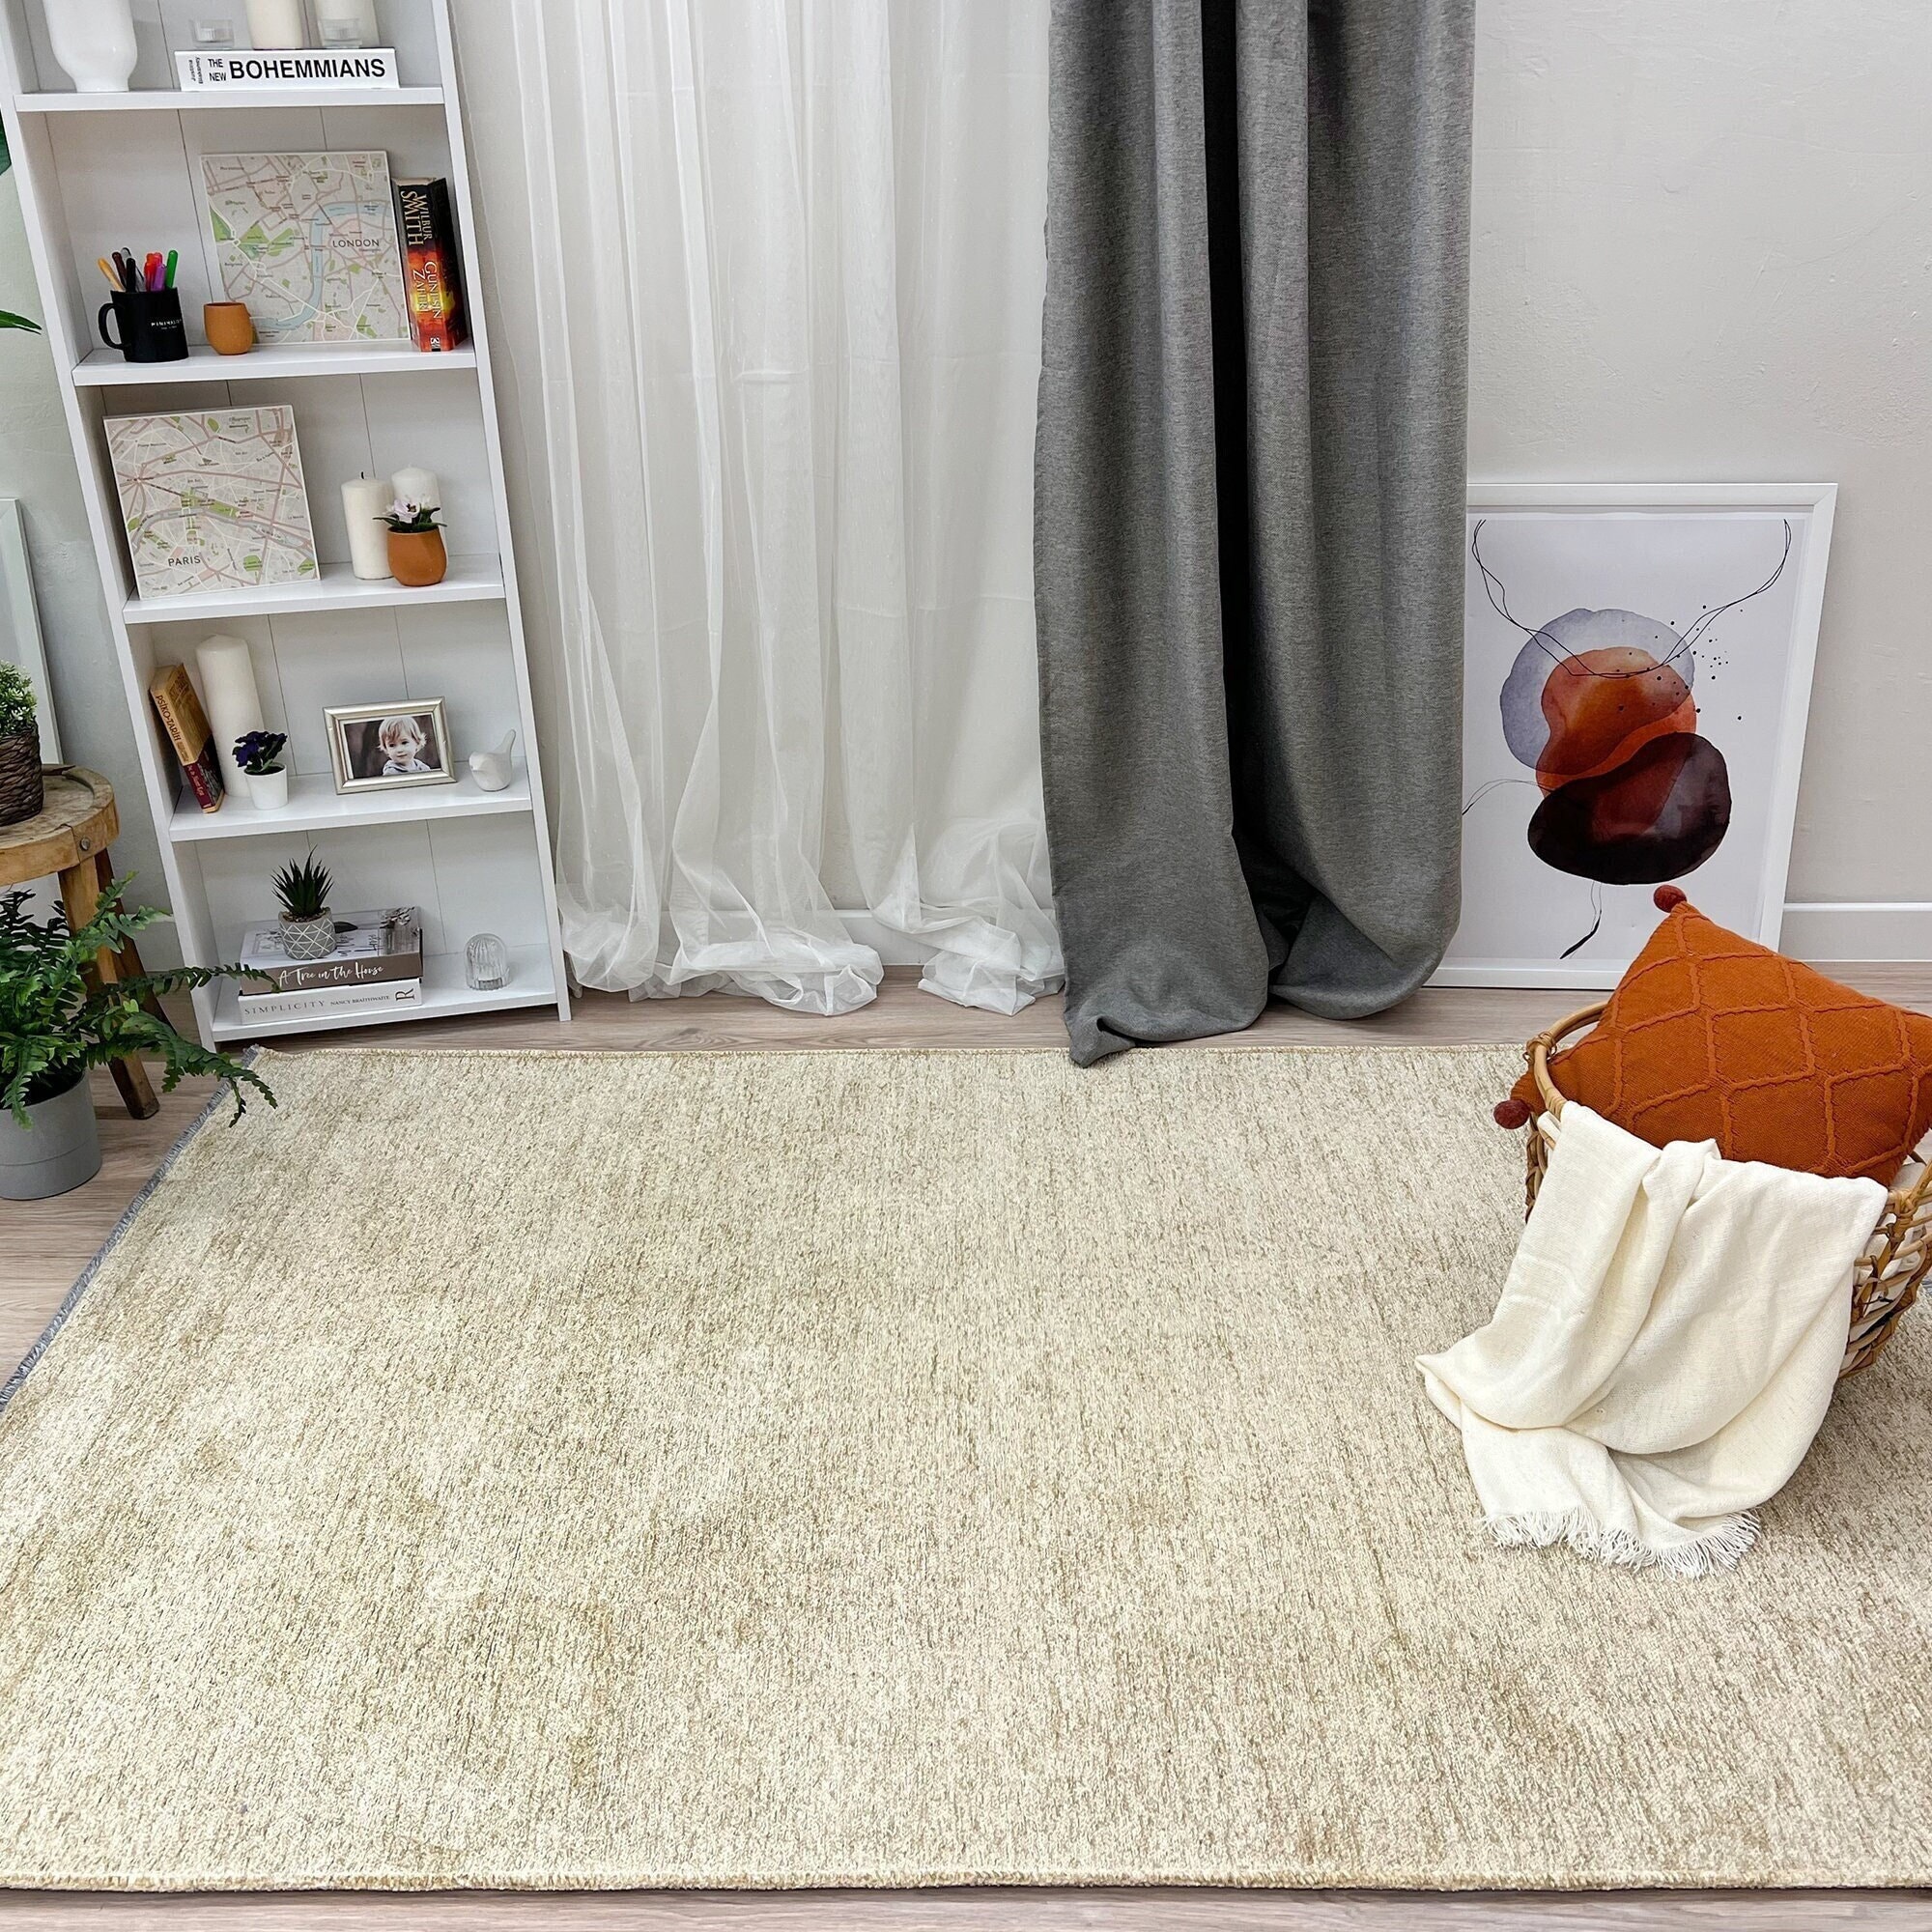  Alfa Rich 5x8 Beige Grey Area Rugs for Living Room Bedroom  Decor Cotton Washable Pet Friendly : Home & Kitchen